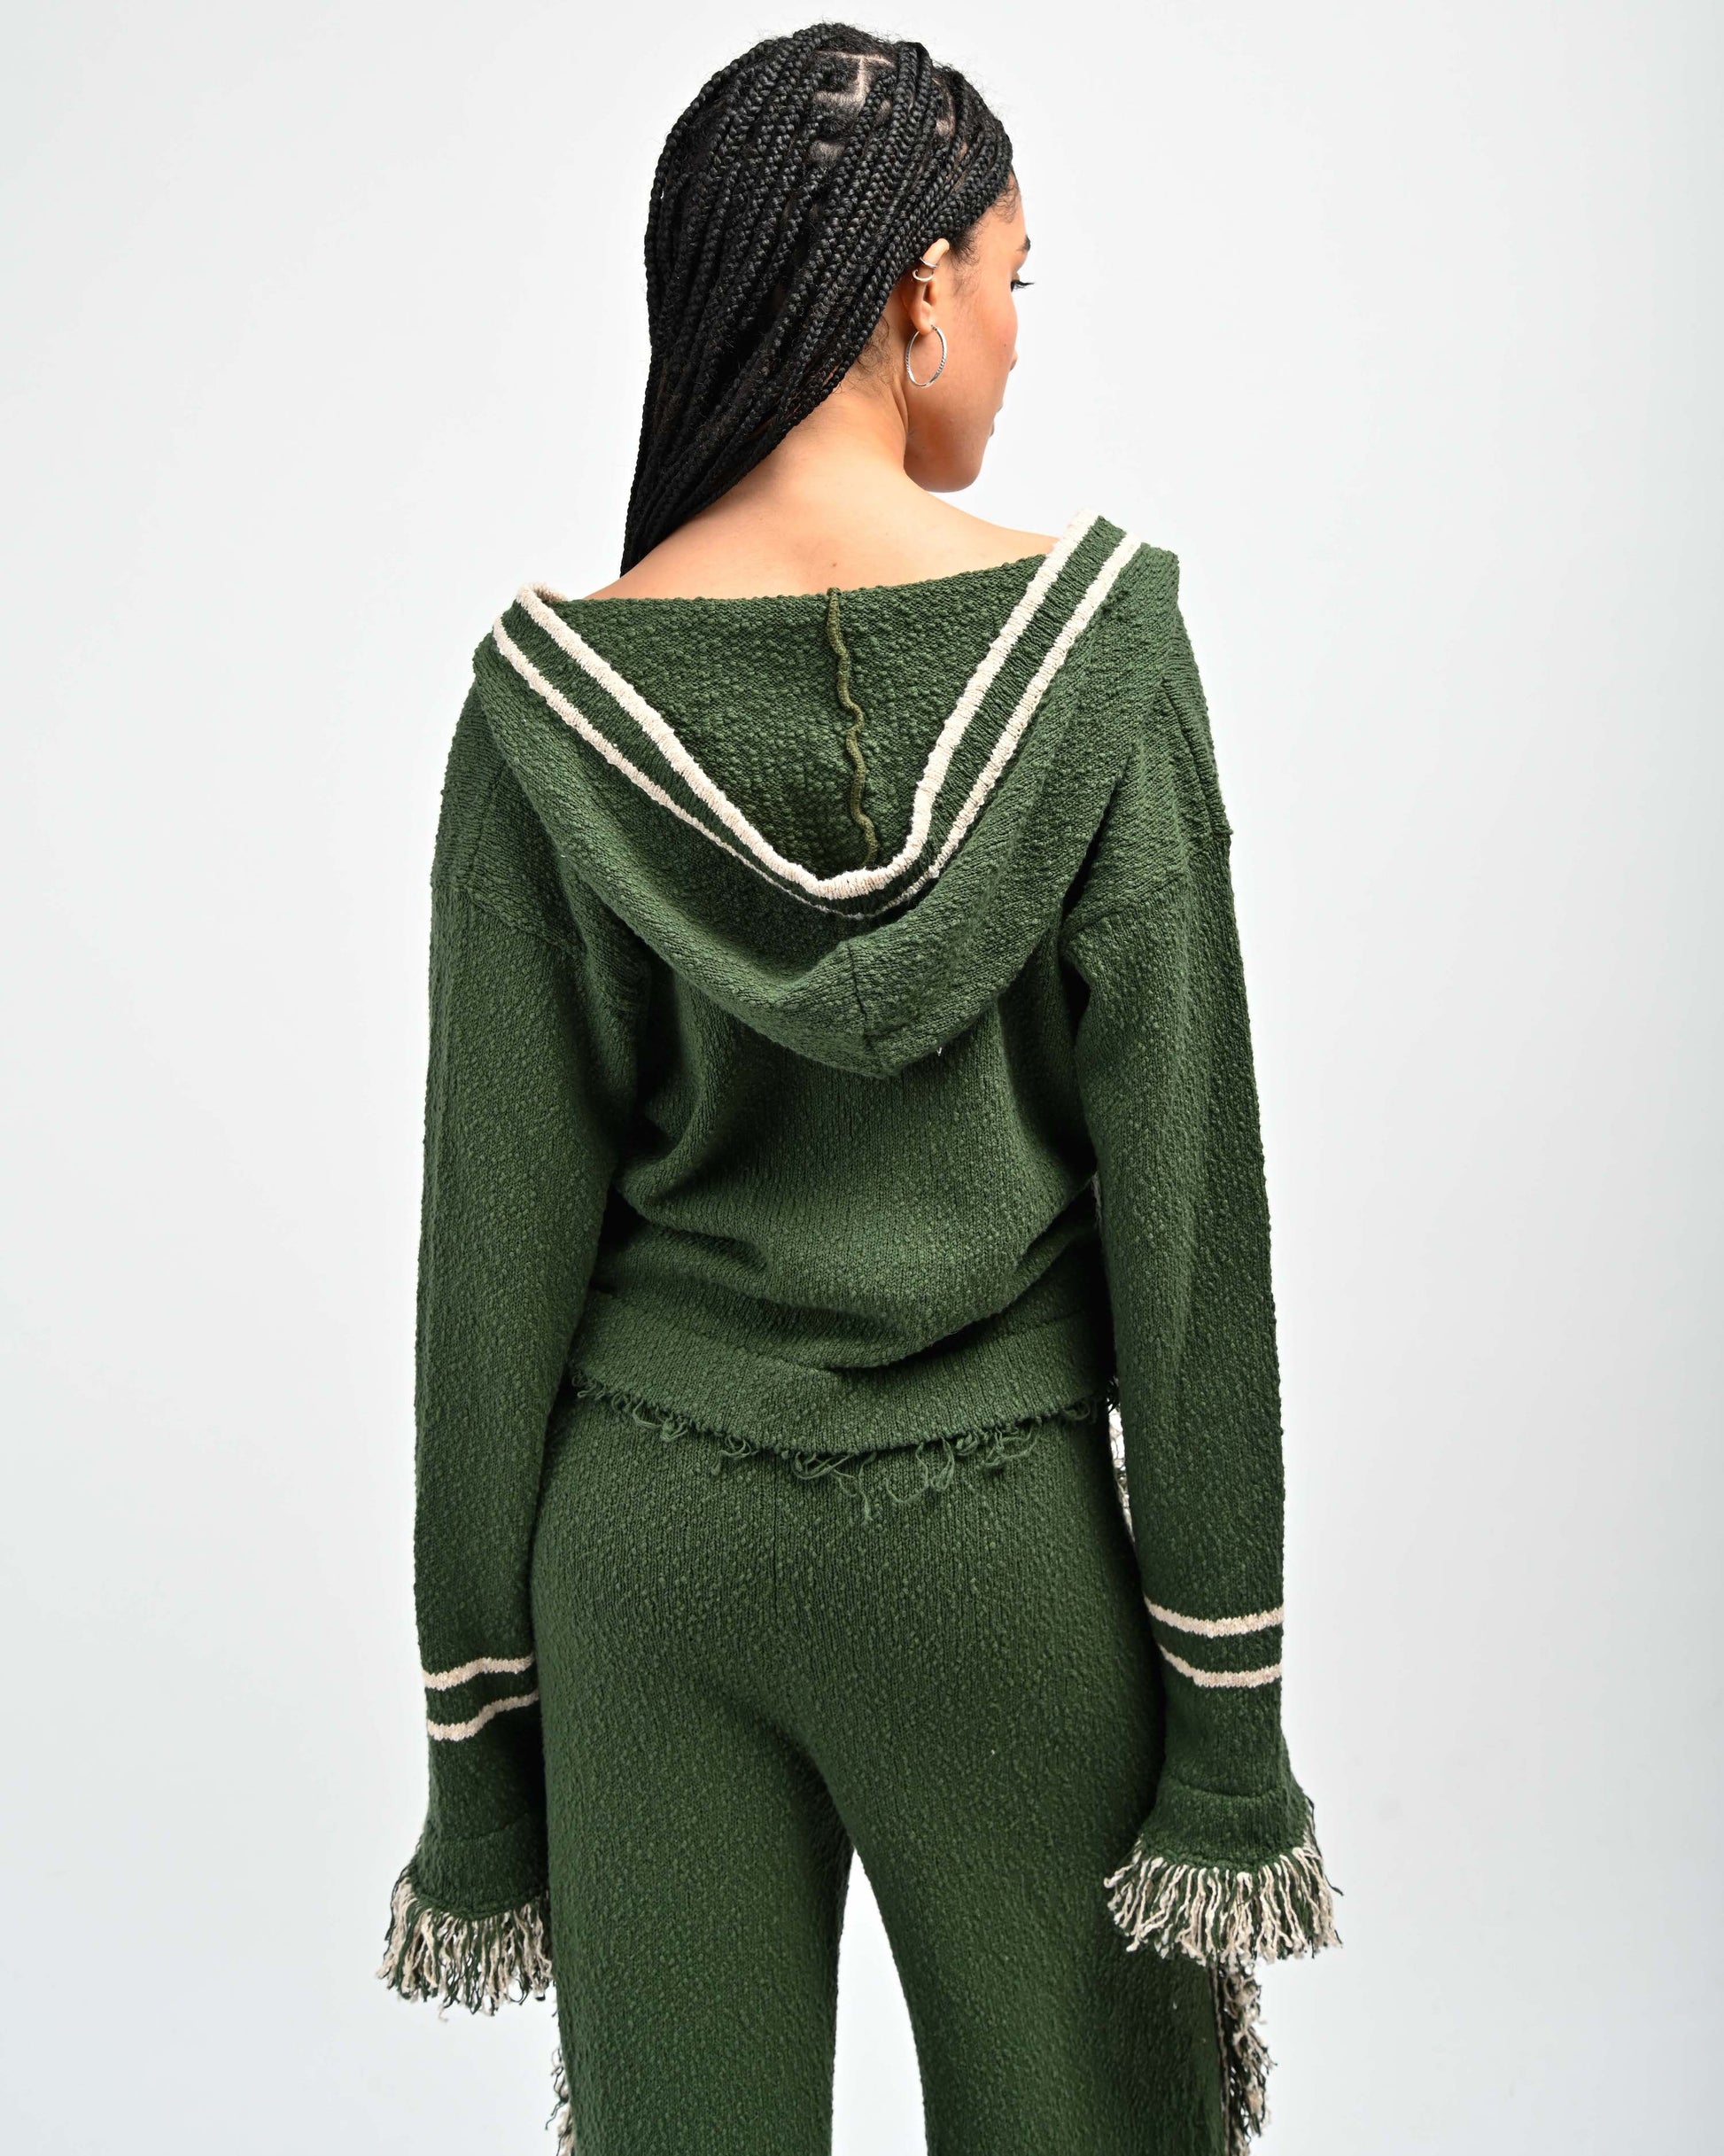 Back View of model in Andy Fringe Knit Hoodie in Green by Aseye Studio